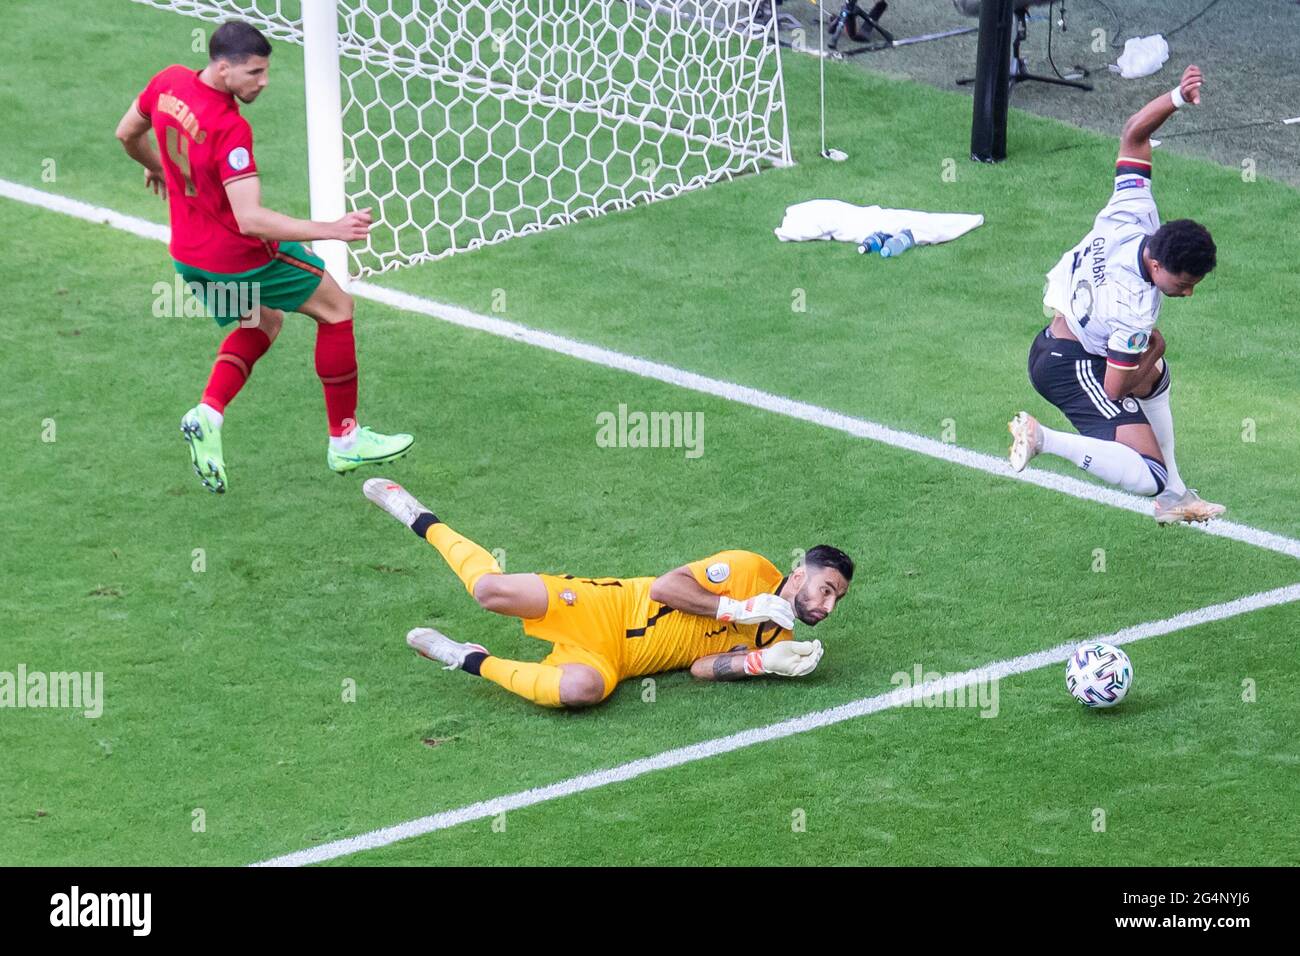 Munich, Germany. 19th June, 2021. Ruben Dias, Rui Patricio of Portugal and Serge Gnabry of Germany are seen in action during the UEFA EURO 2020 Championship Group F match between Portugal and Germany at Football Arena Munich. (Final score; Portugal 2:4 Germany) Credit: SOPA Images Limited/Alamy Live News Stock Photo